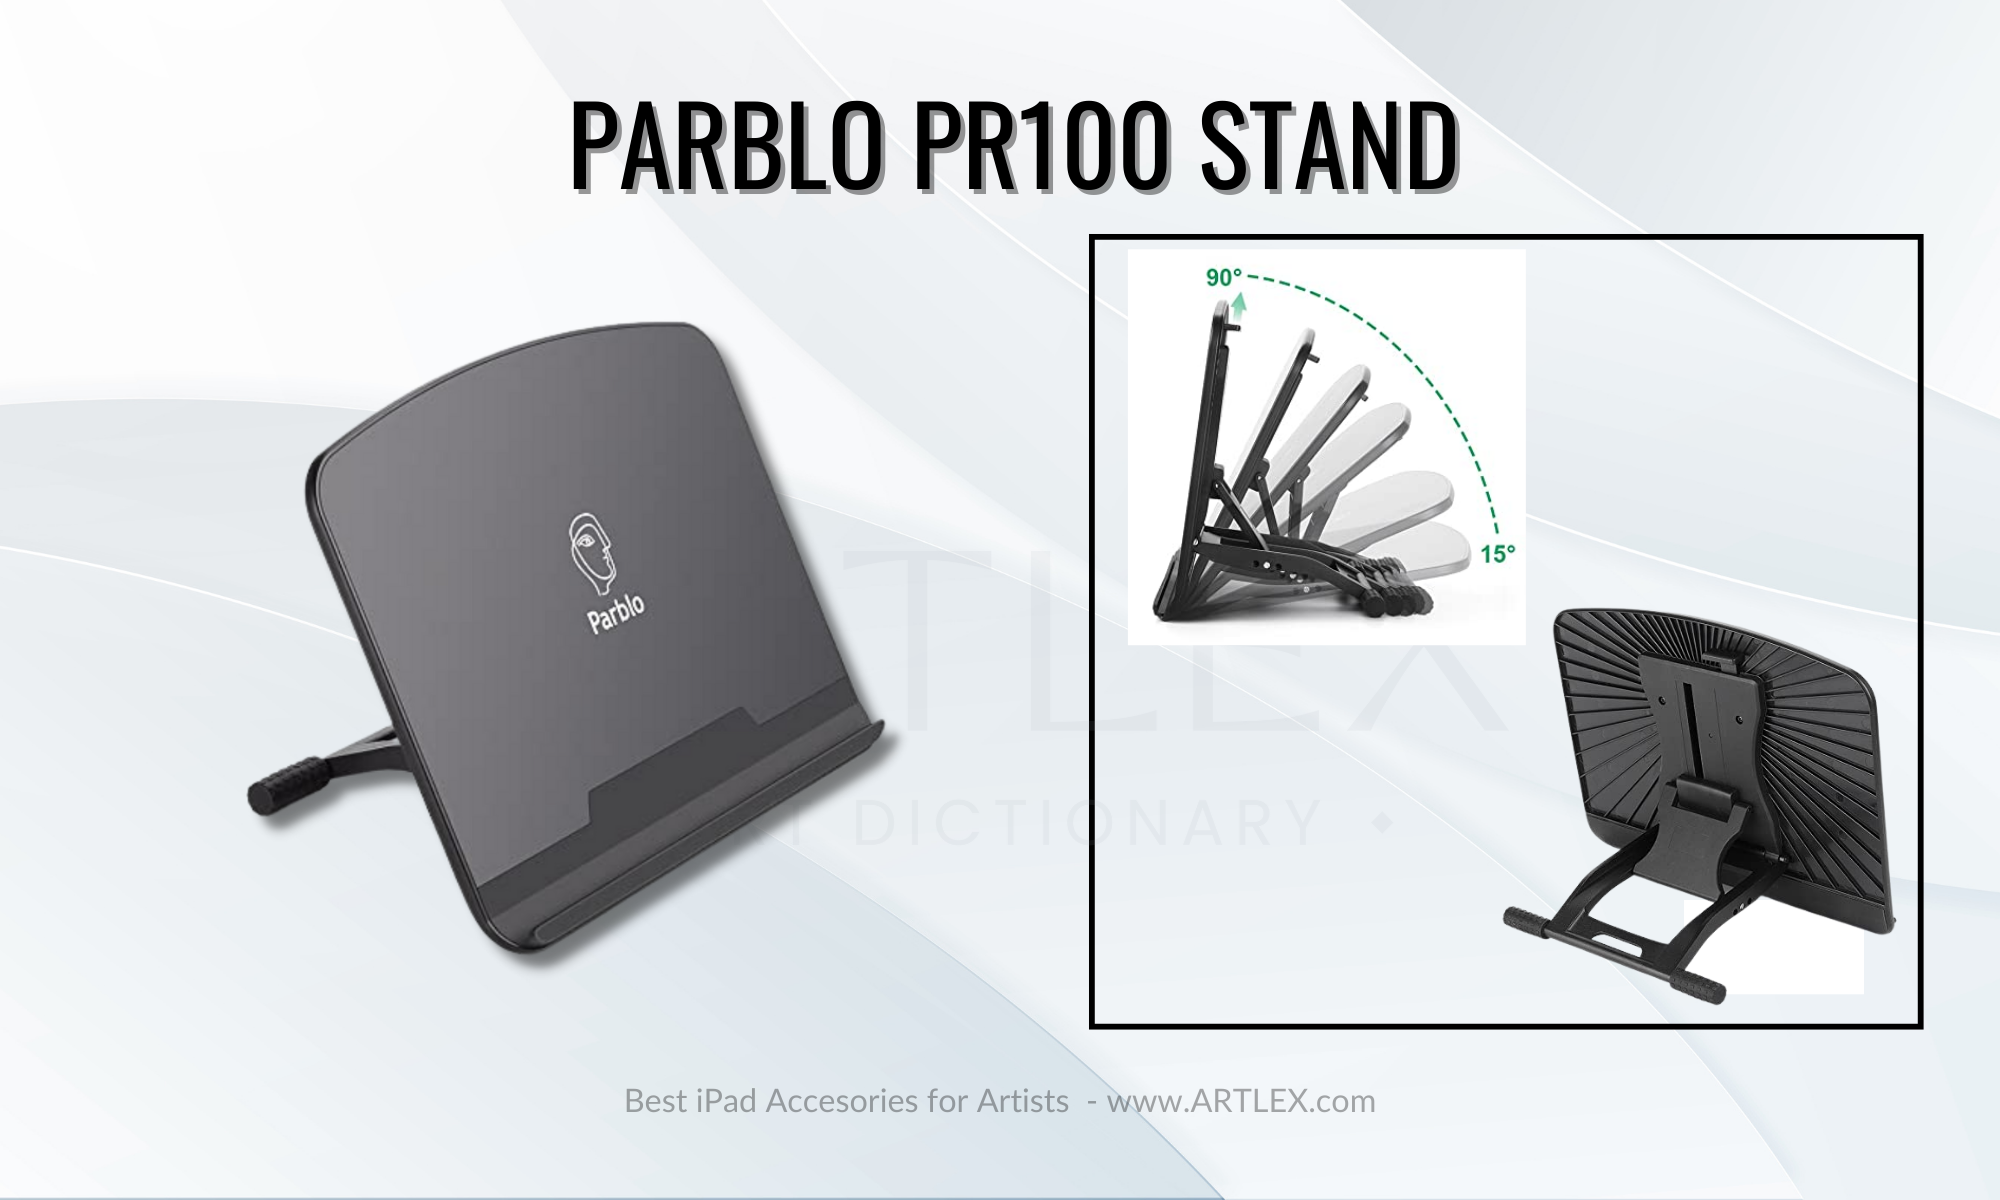 Best Tablet Stand for iPad — Parblo PR100 Tablet Stand